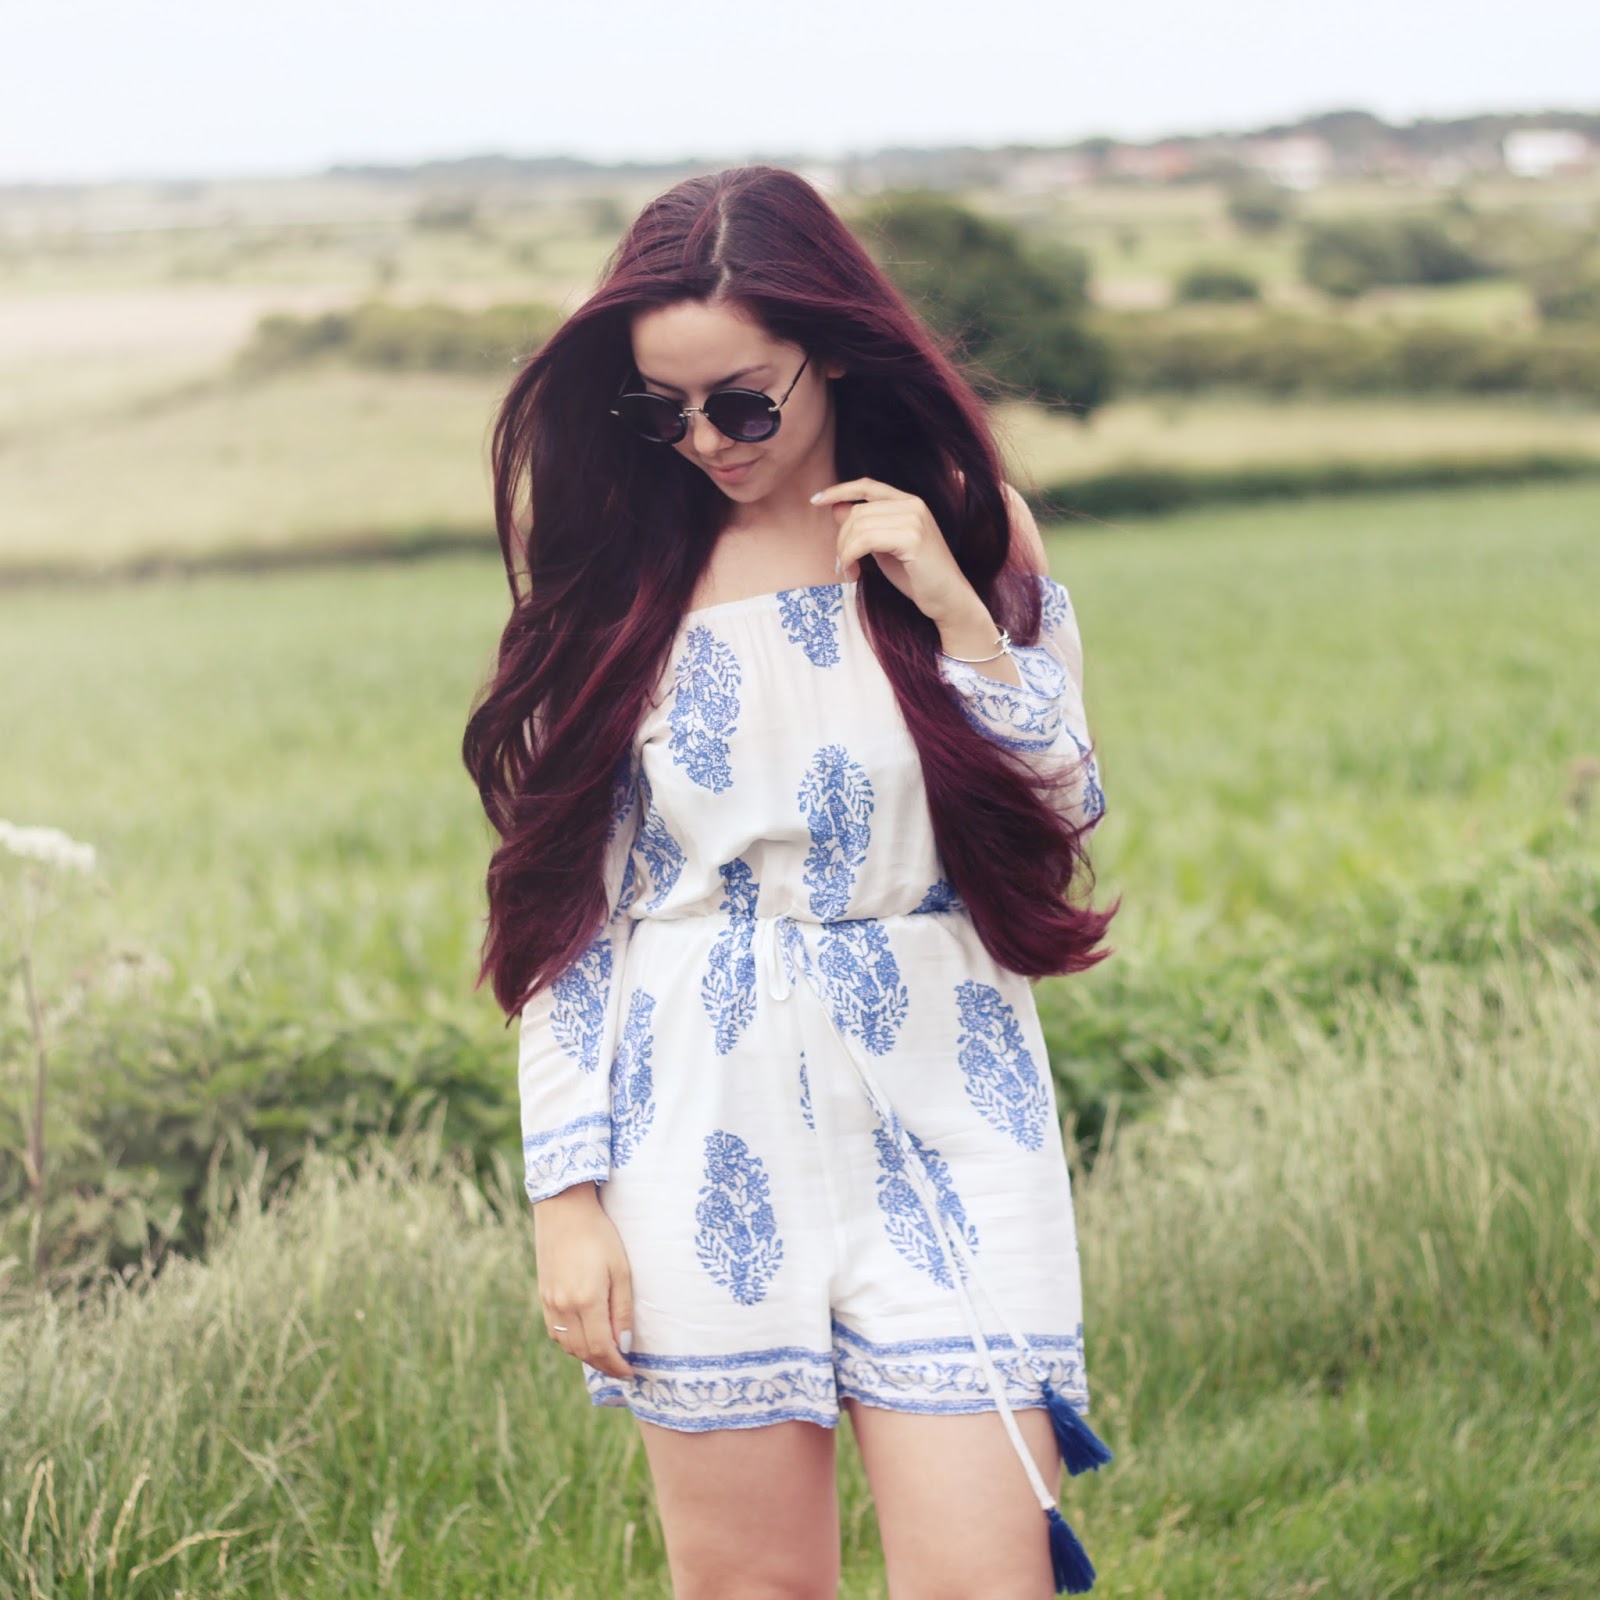 New Look Playsuit Fashion by Jen Lou Meredith